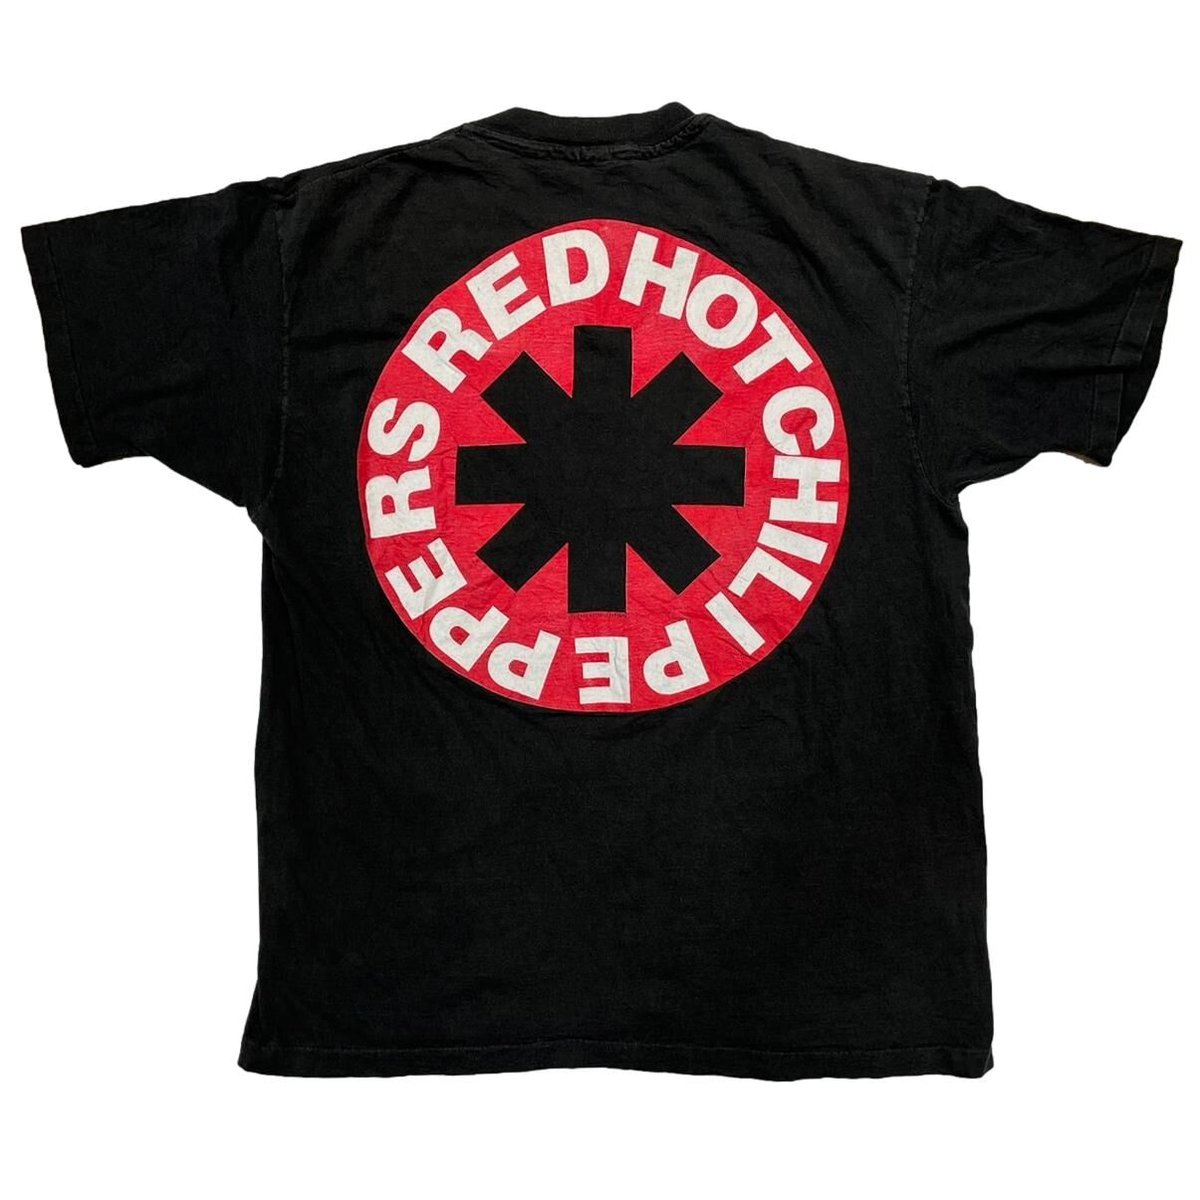 RED HOT CHILI PEPPERS 1990 PICASSO FITS XL 2012